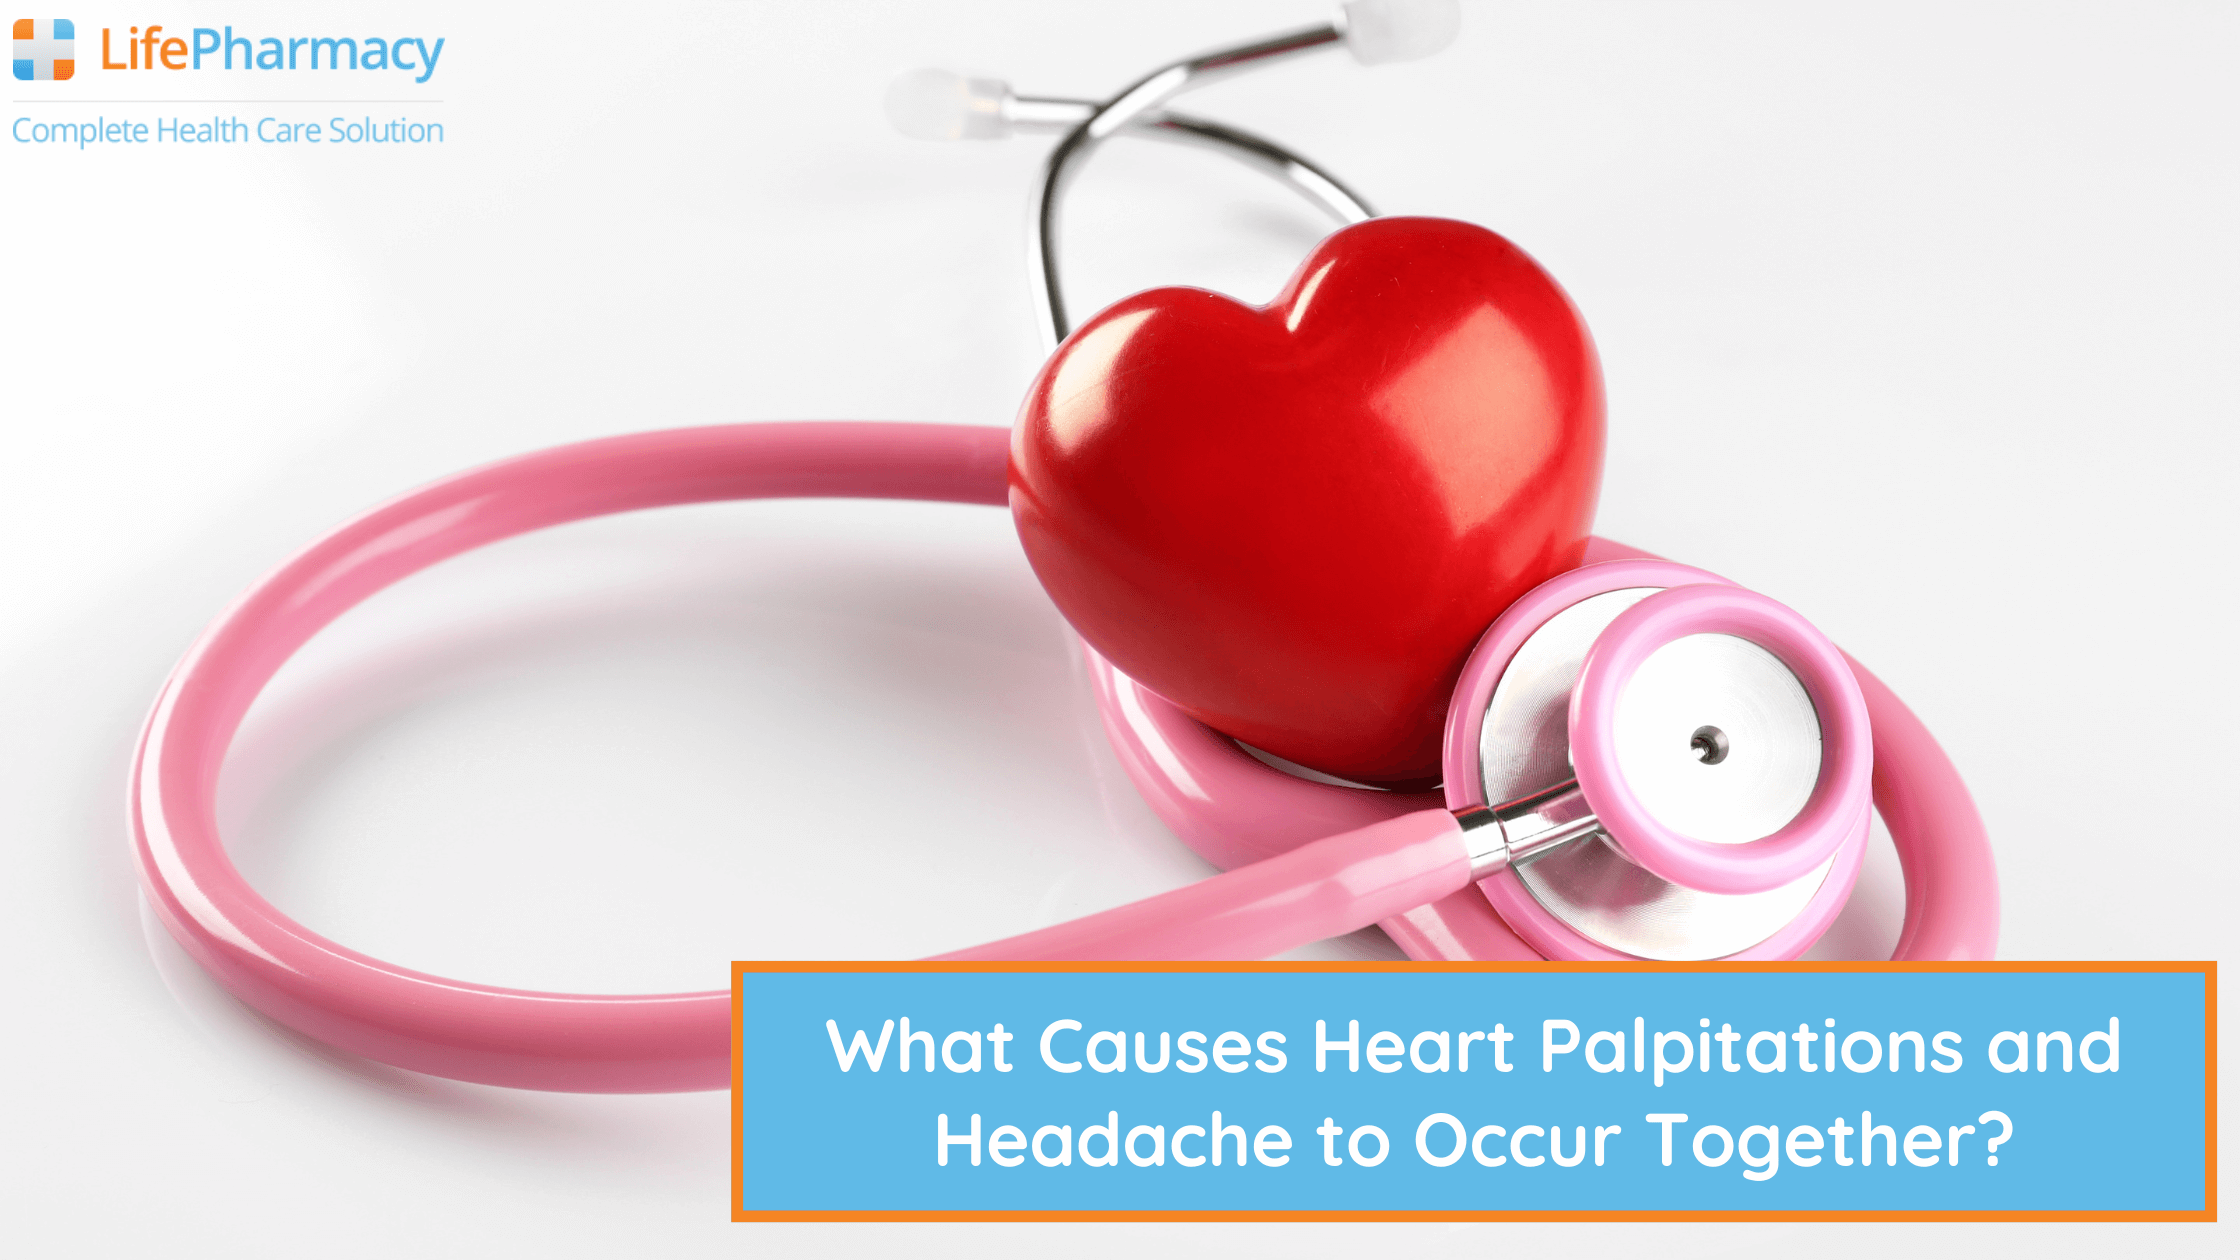 What Causes Heart Palpitations and Headache to Occur Together